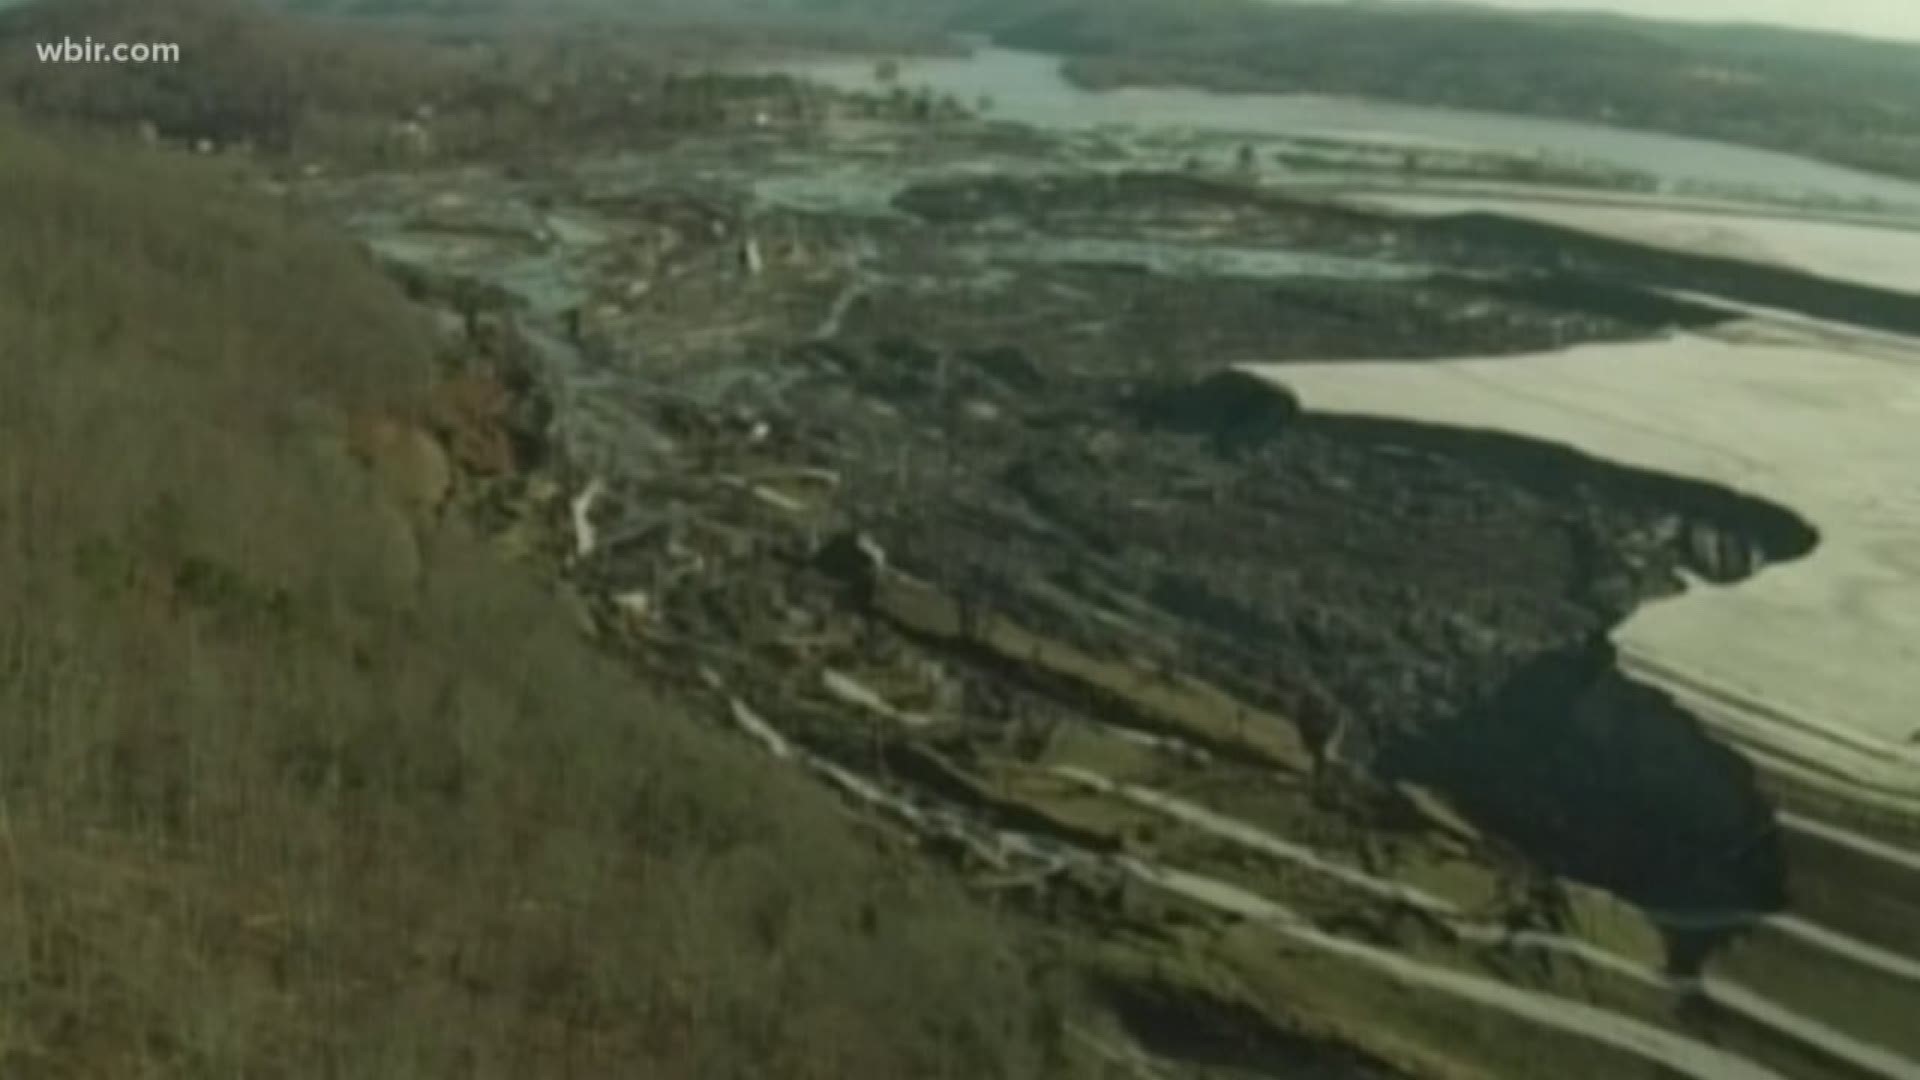 Congressman-elect Tim Burchett says he may seek a congressional investigation into the health of clean up workers after TVA's coal ash spill.